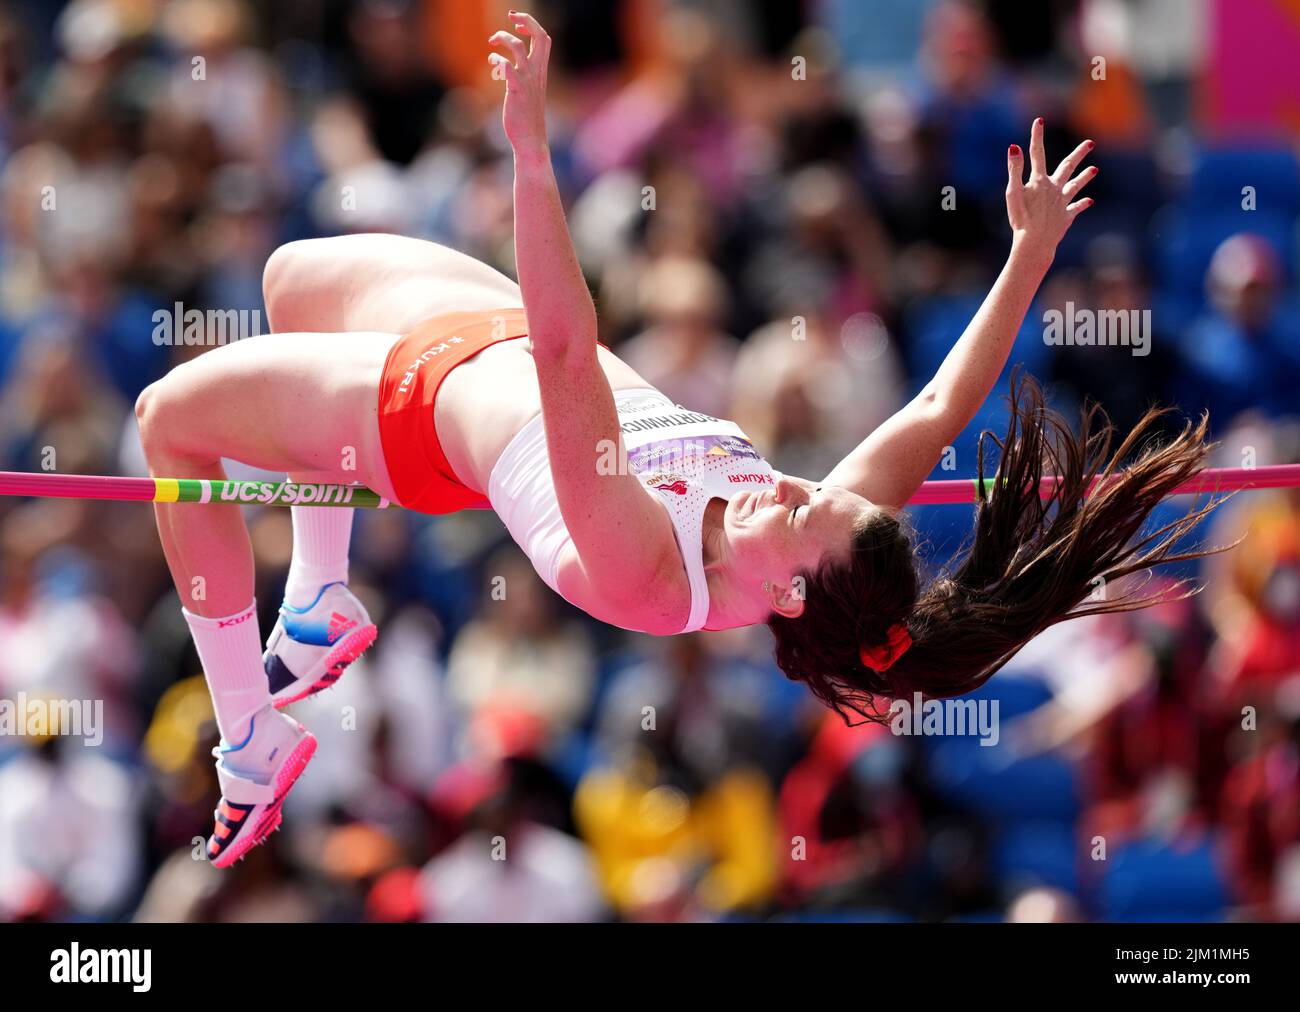 England's Emily Borthwick in action during the Women's High Jump Qualifyng Round at Alexander Stadium on day seven of the 2022 Commonwealth Games in Birmingham. Picture date: Thursday August 4, 2022. Stock Photo